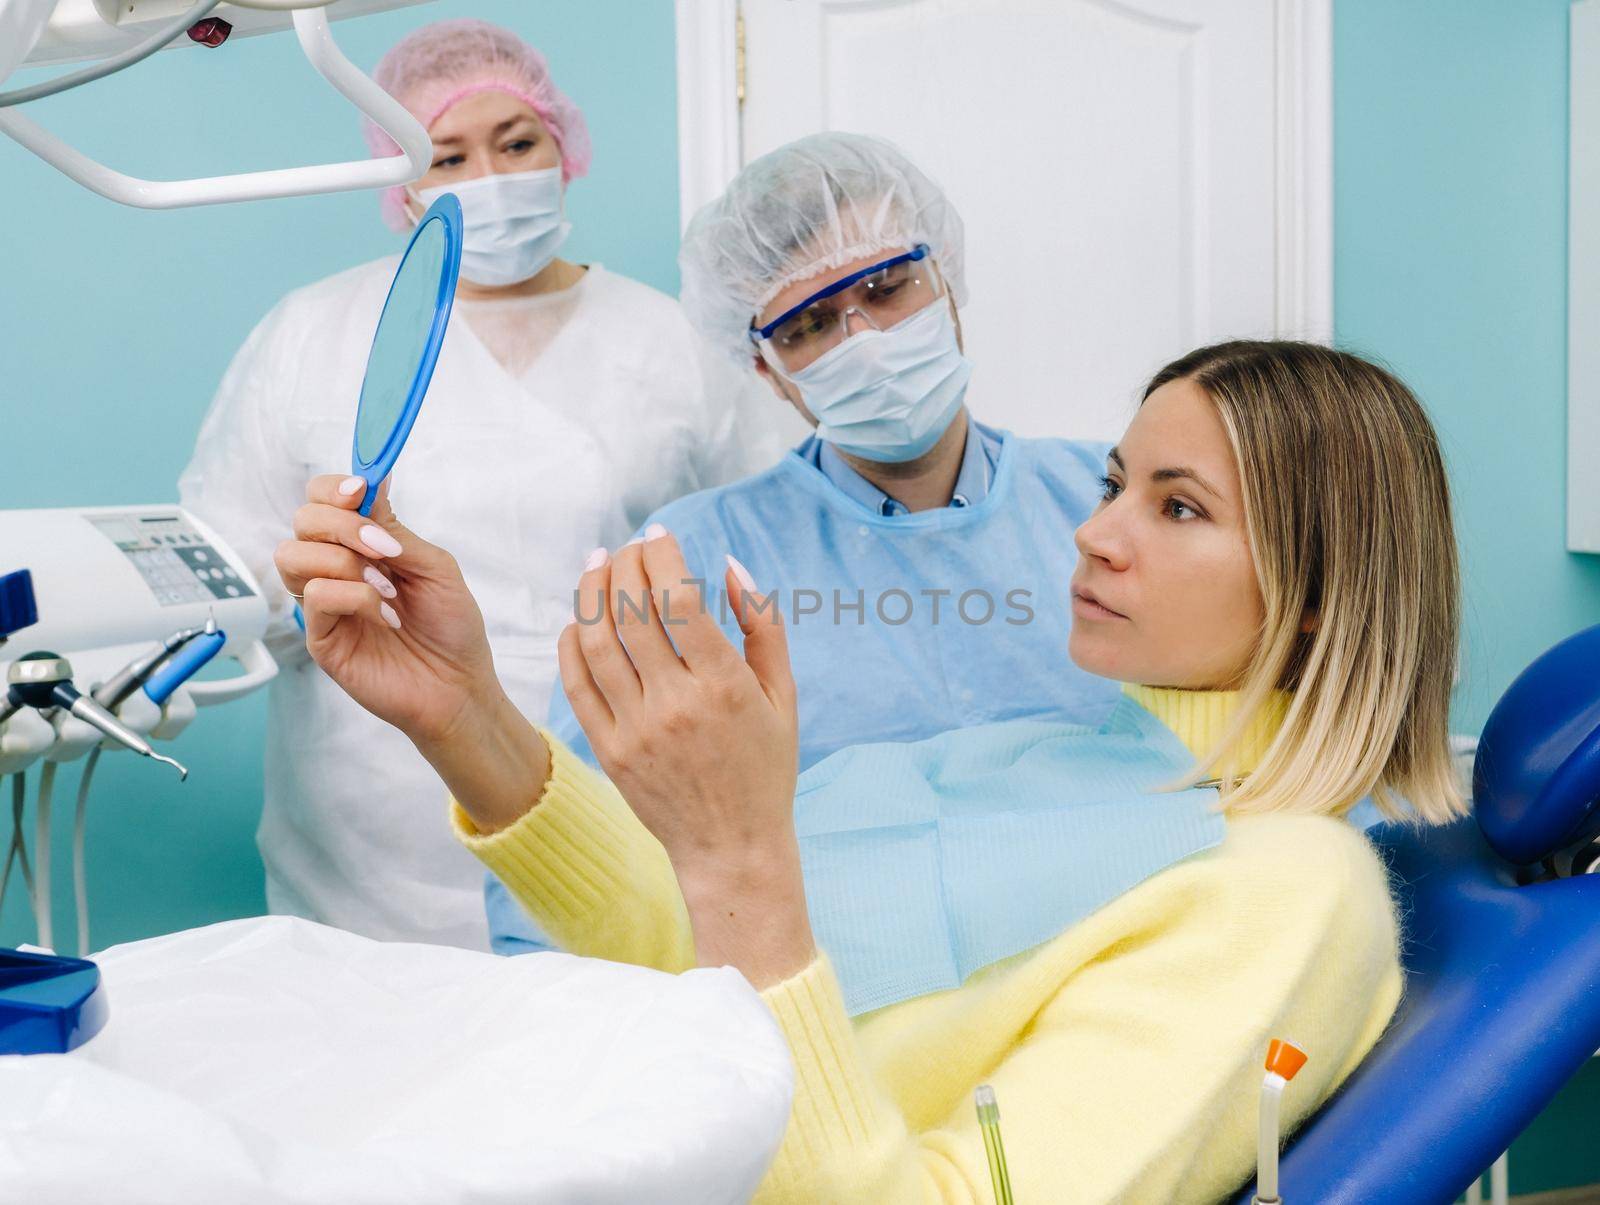 The dentist shows the client the results of his work in the mirror.The client smiles.